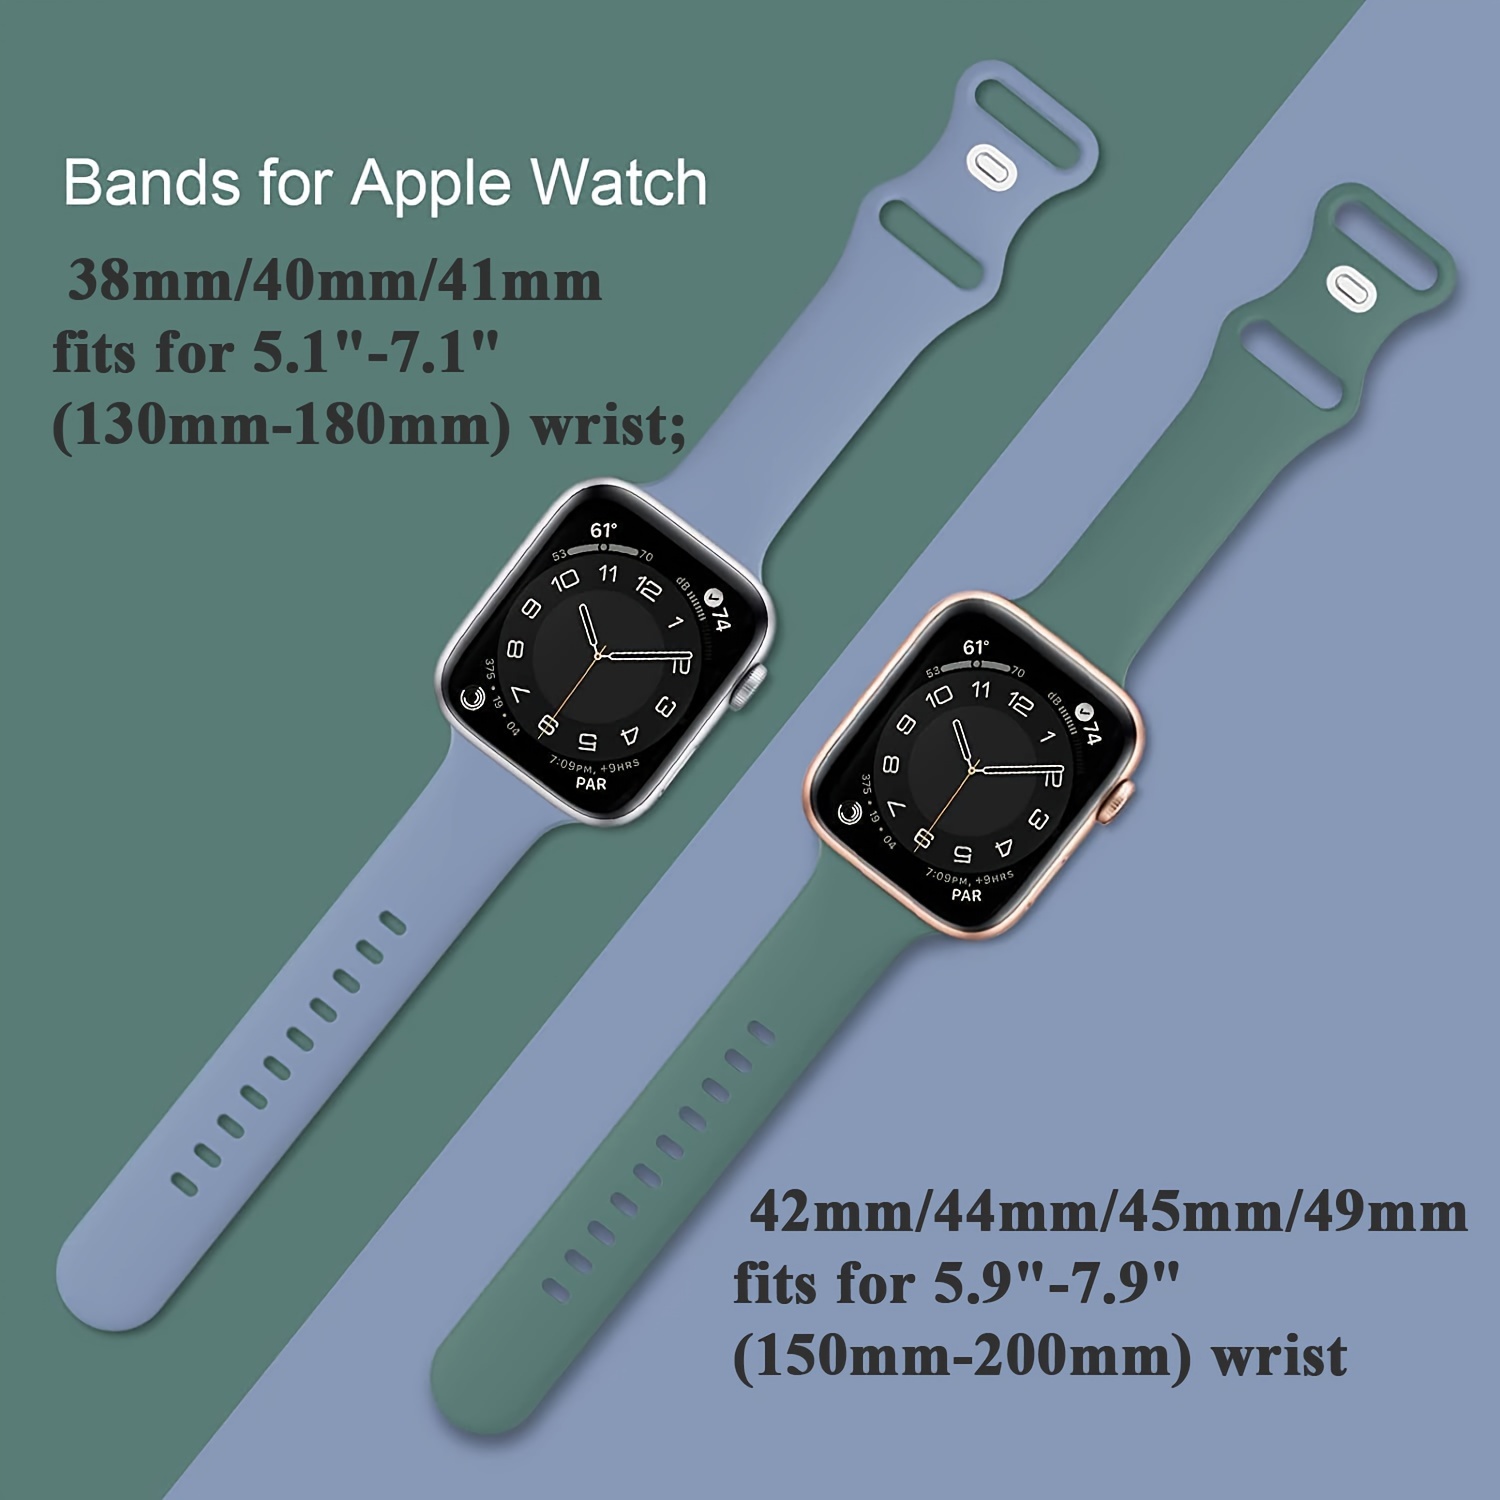 Breathable Silicone strap For Apple Watch Band 40mm 44mm 41mm 45mm